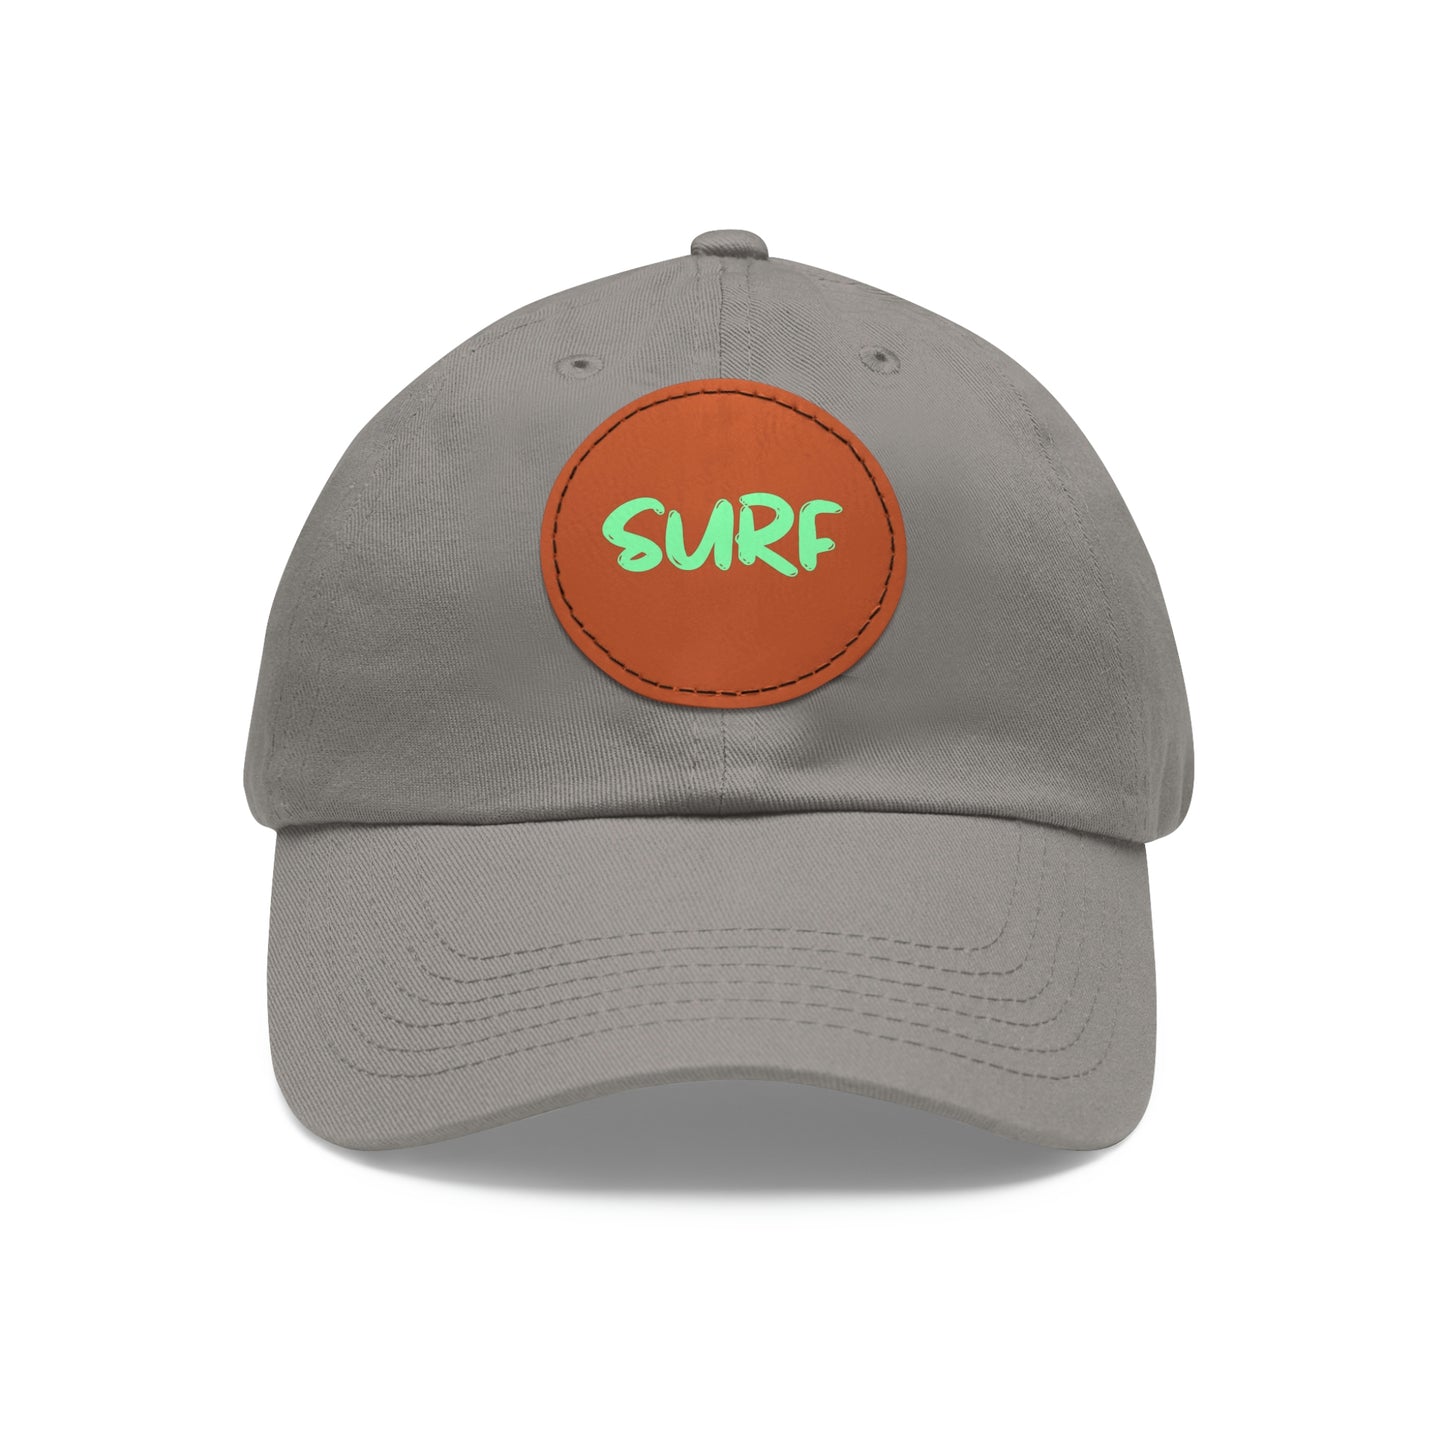 SURF - Dad Hat with Round Leather Patch